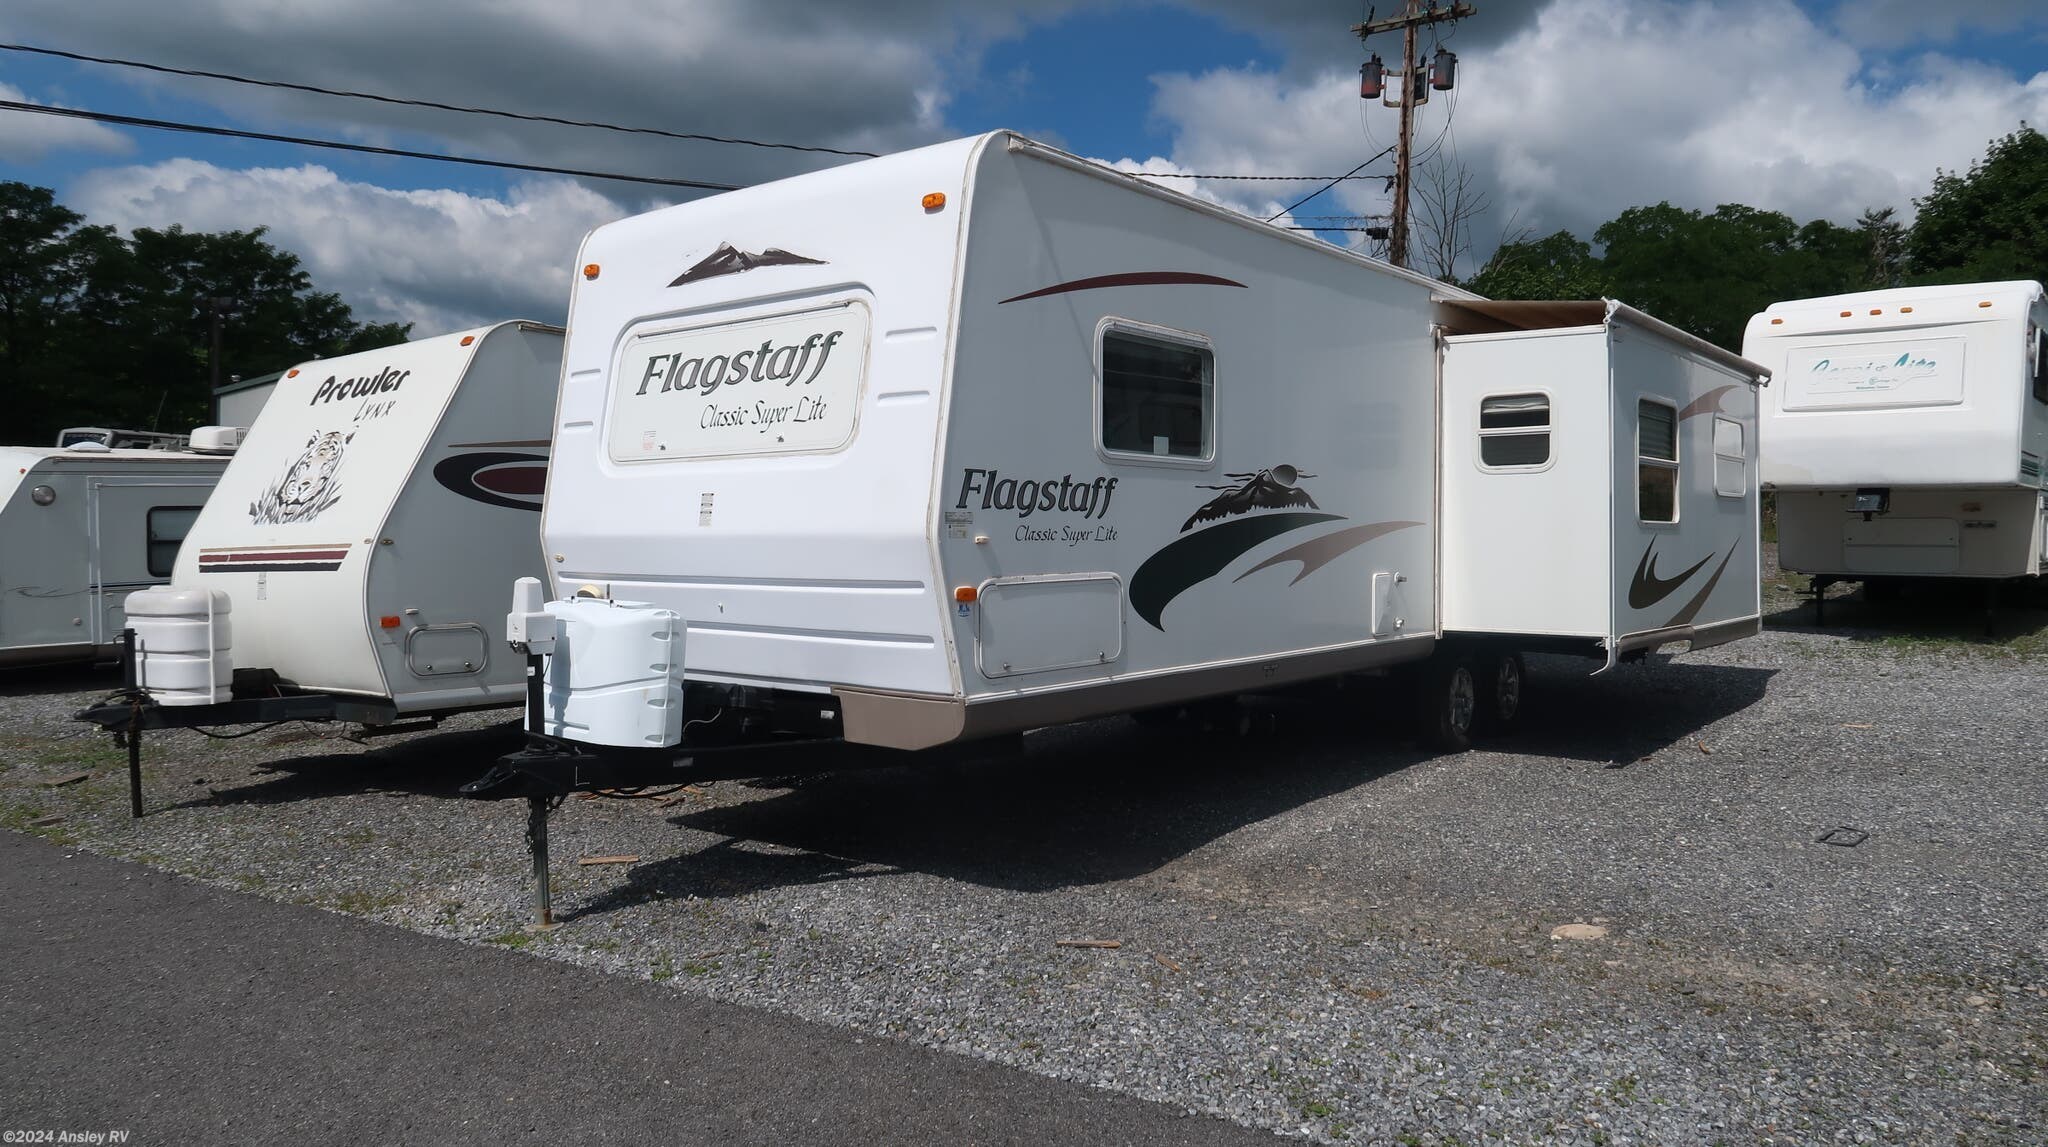 2008 Forest River Flagstaff Classic Super Lite 831RLSS RV for Sale in Duncansville, PA 16635 2008 Forest River Flagstaff Classic Super Lite